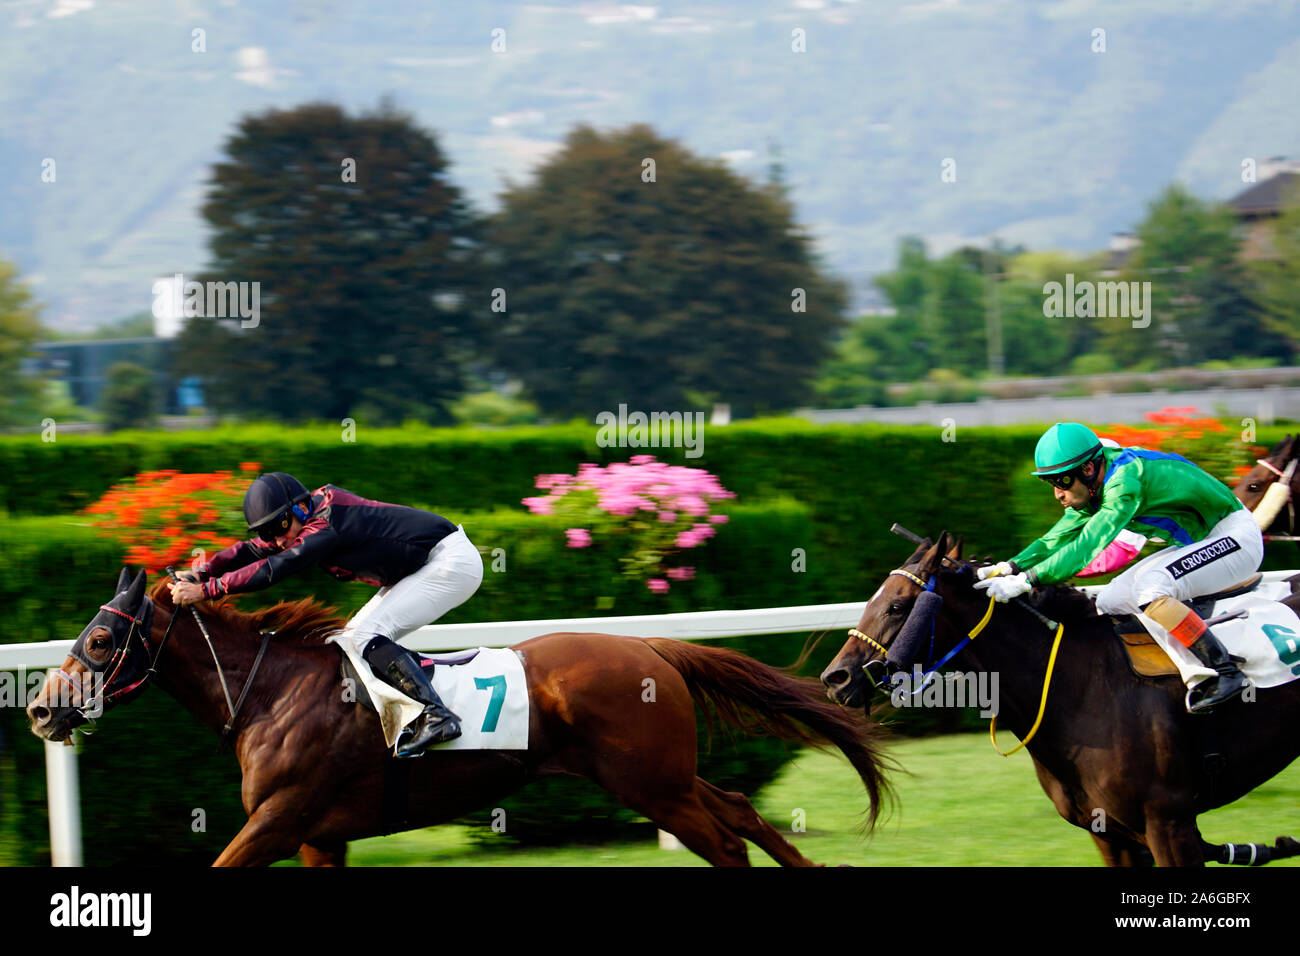 Horses racing at the Merano Grand Prize on September 28th in Italy in 2019 Stock Photo